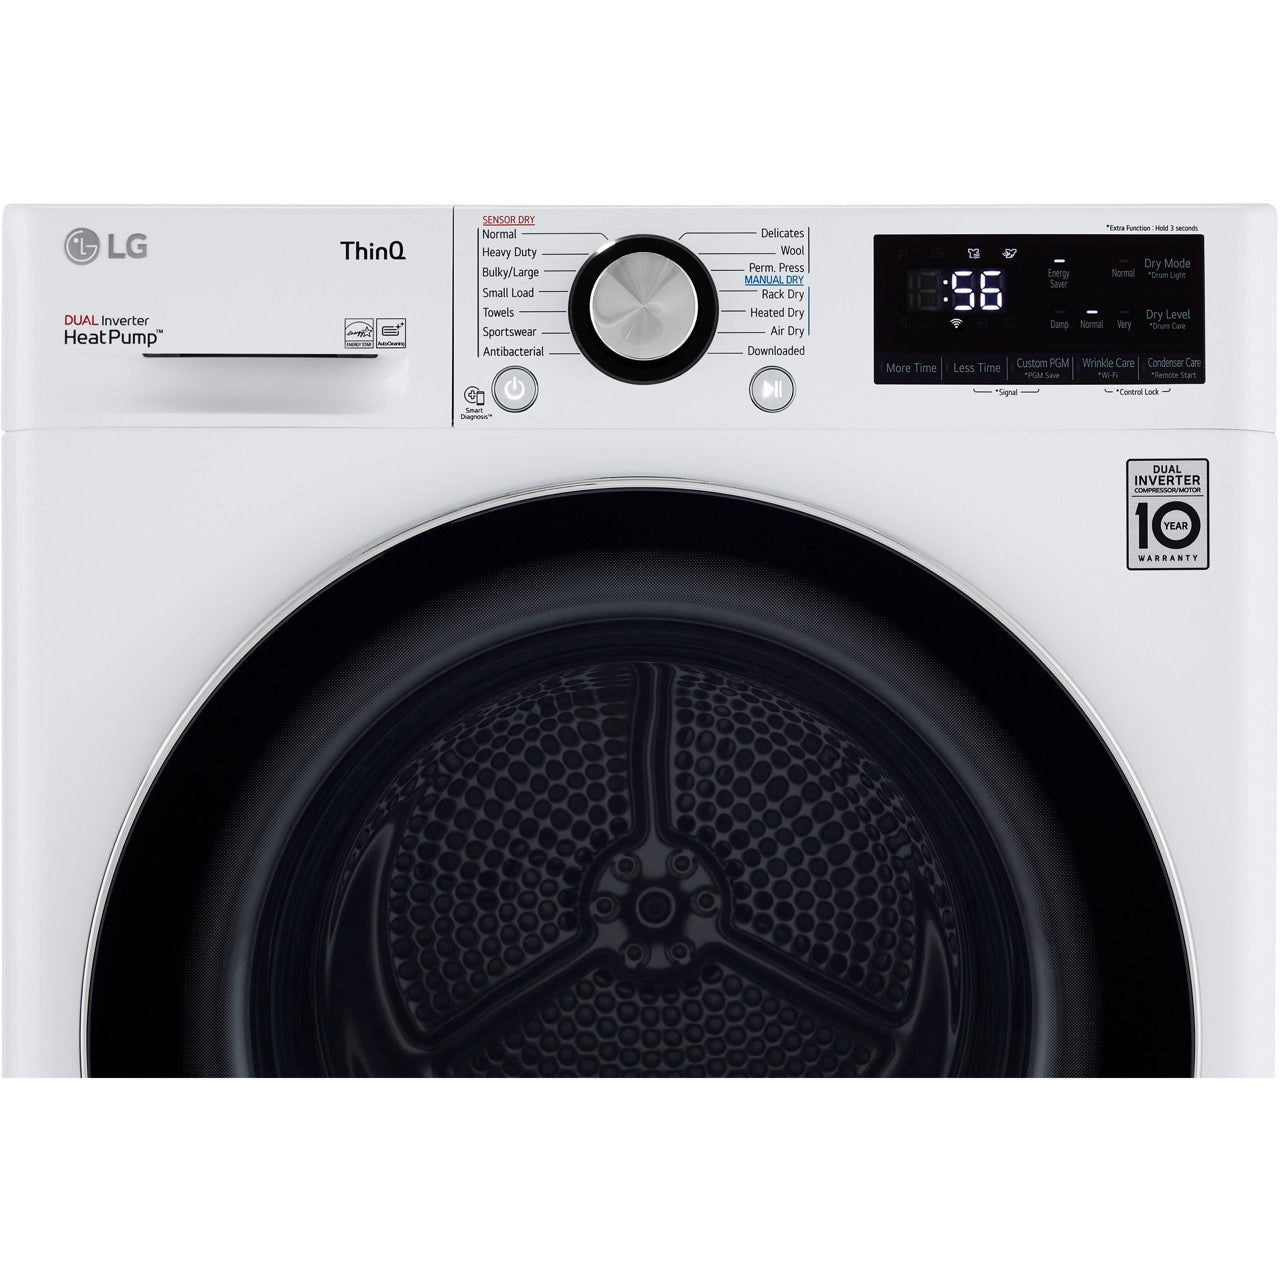 LG 4.2-Cu. Ft. Compact Front Load Dryer with Dual Inverter HeatPump Technology in White (DLHC1455W)